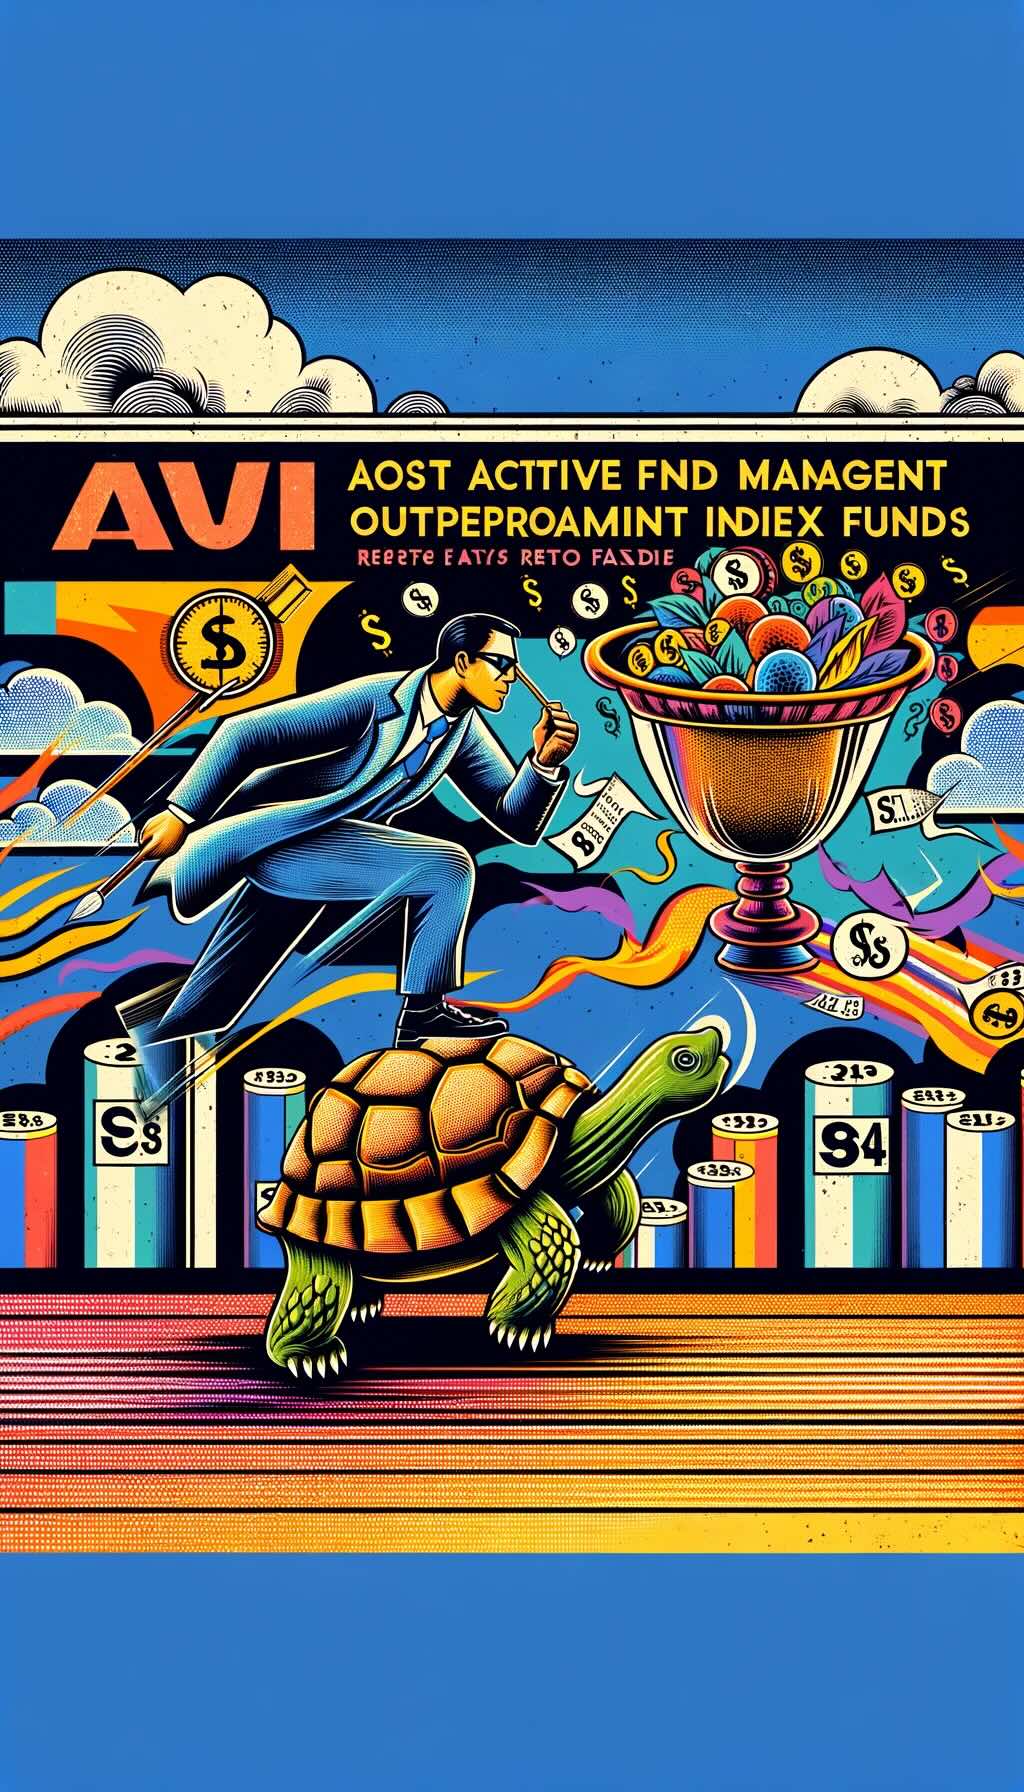 The concept of active fund management outperforming passive index funds, complete with vibrant, playful, and slightly surreal elements